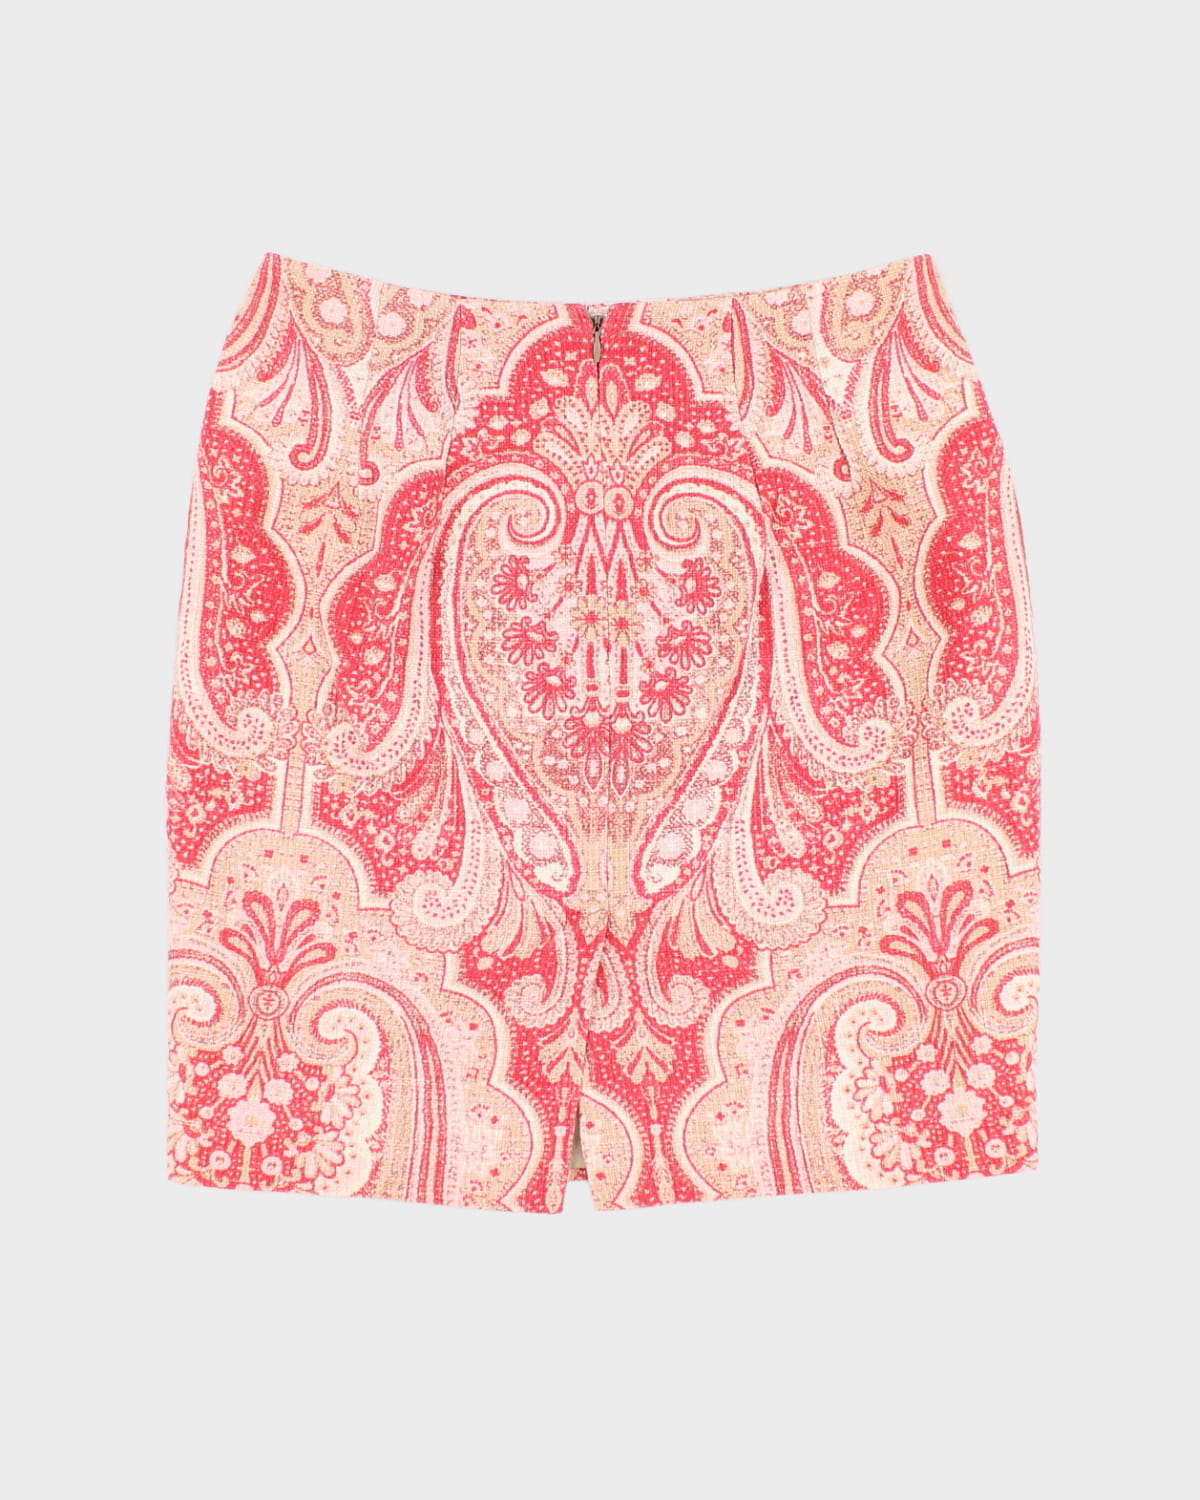 Tommy Hilfiger Pink Woven Patterned Skirt - M